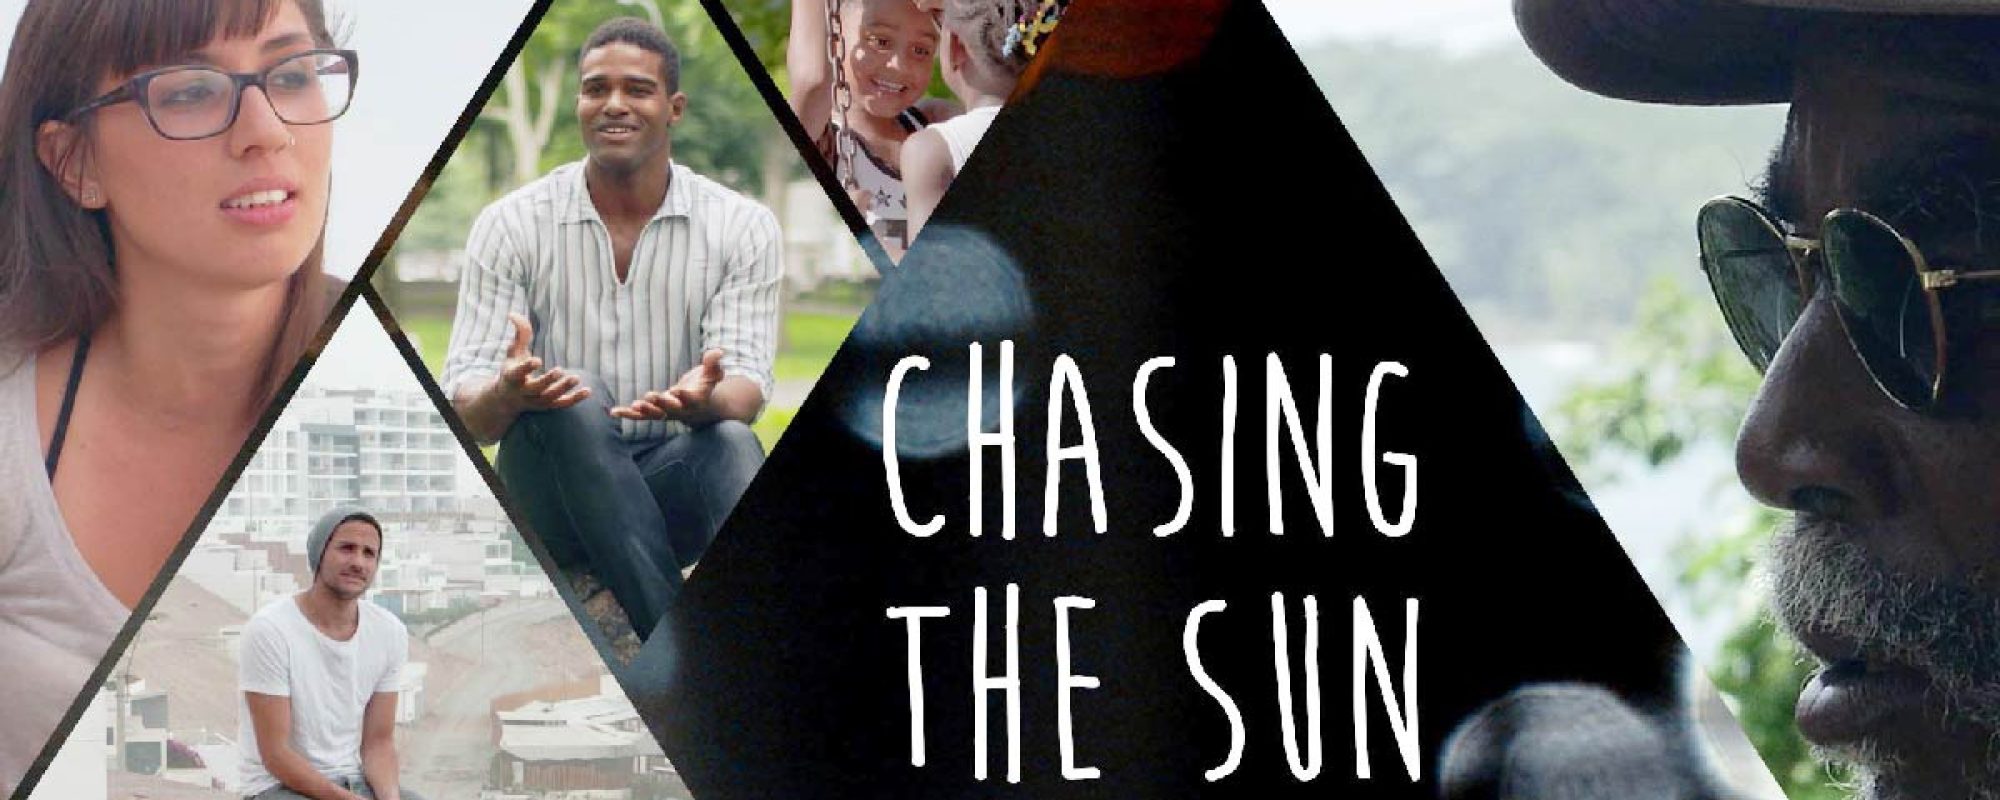 OVATION, JOURNY CAPTURE PREMIERE DATES FOR TWO SEASONS OF CHASING THE SUN DOCUSERIES